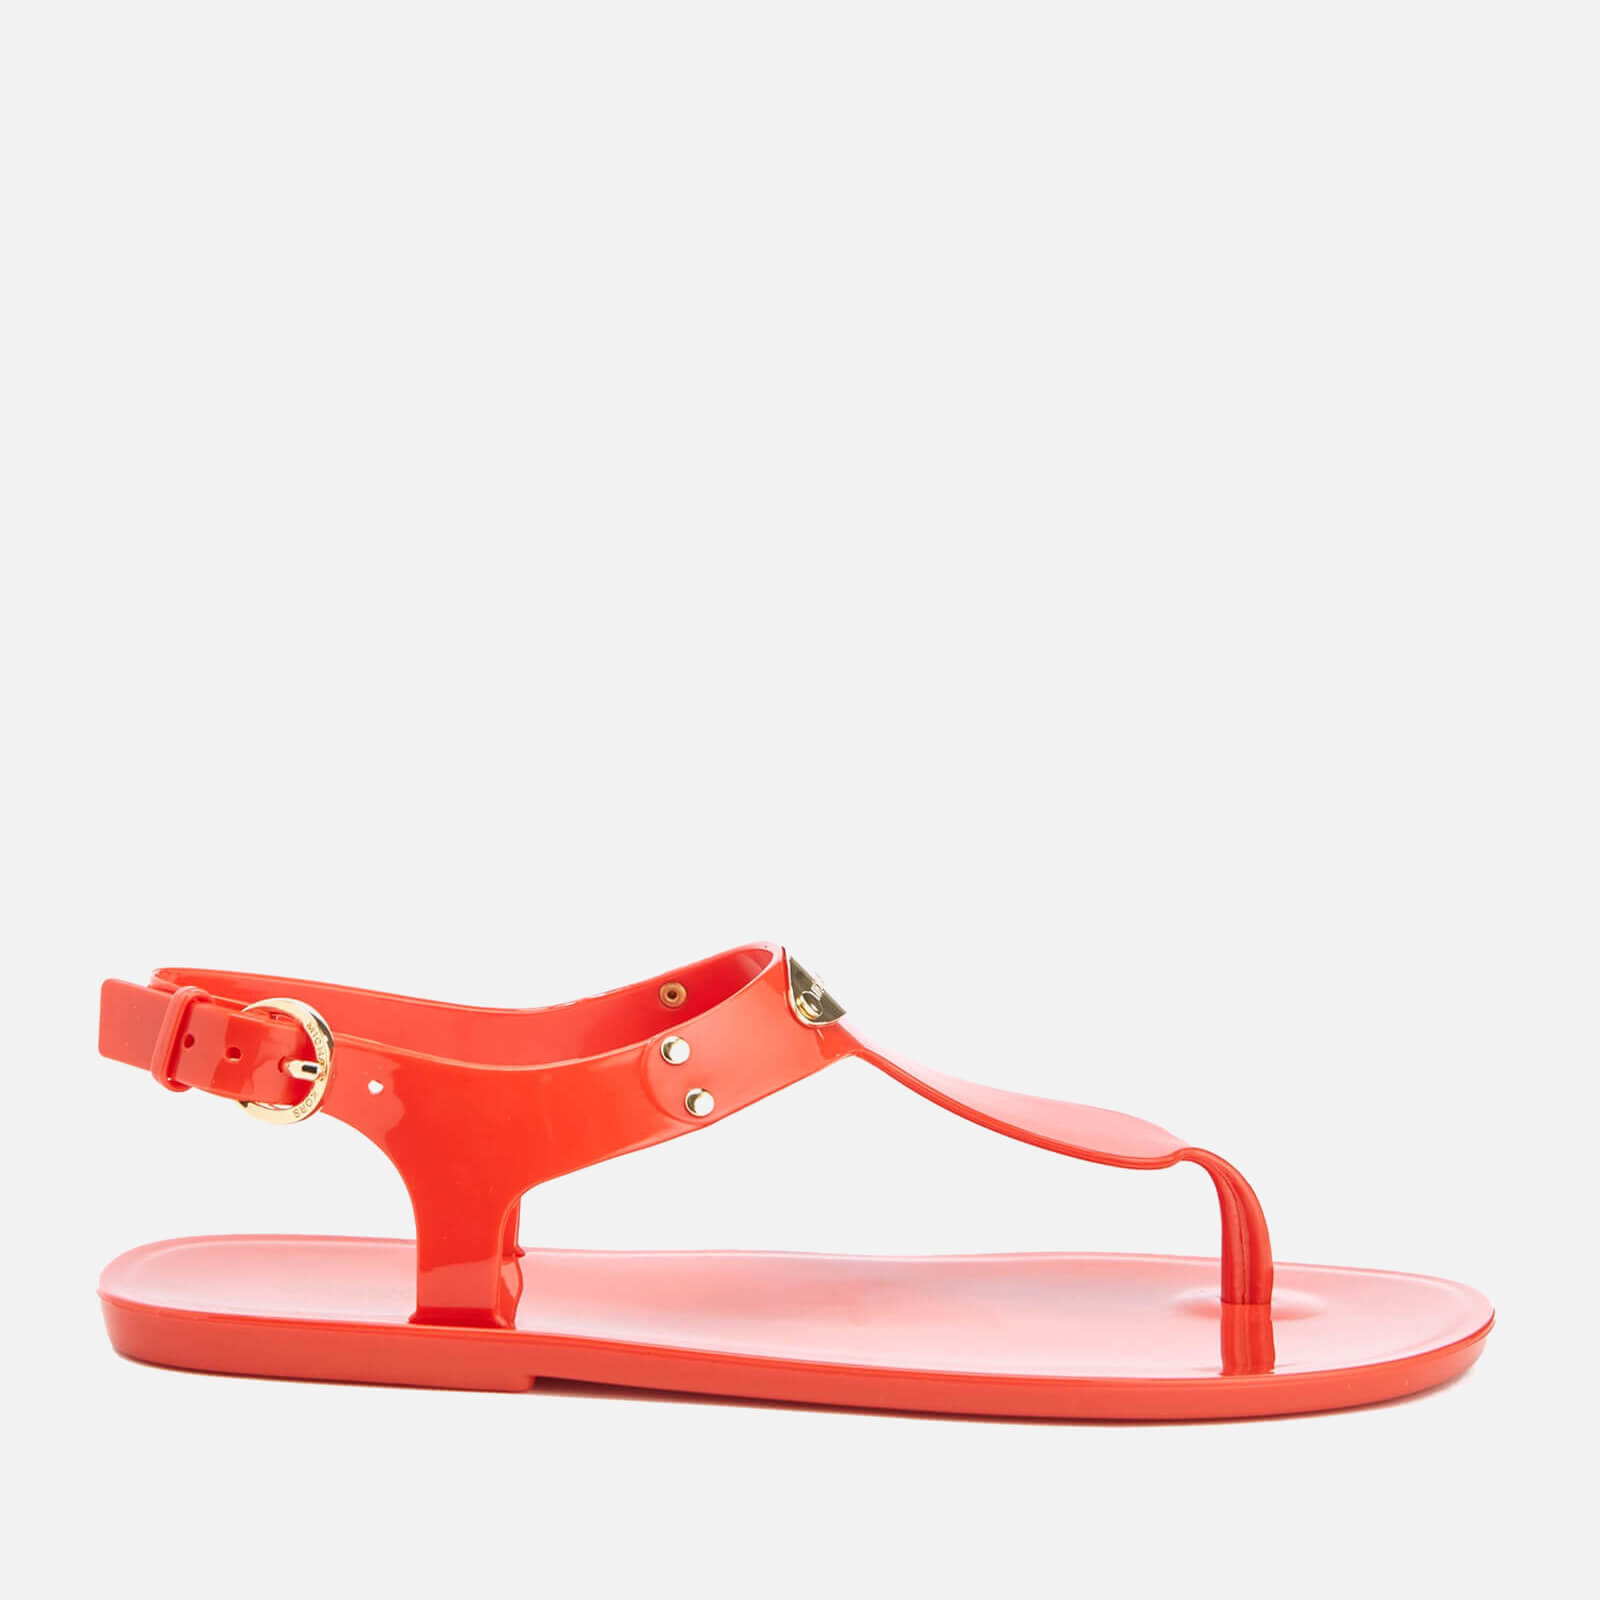 red toe post sandals uk